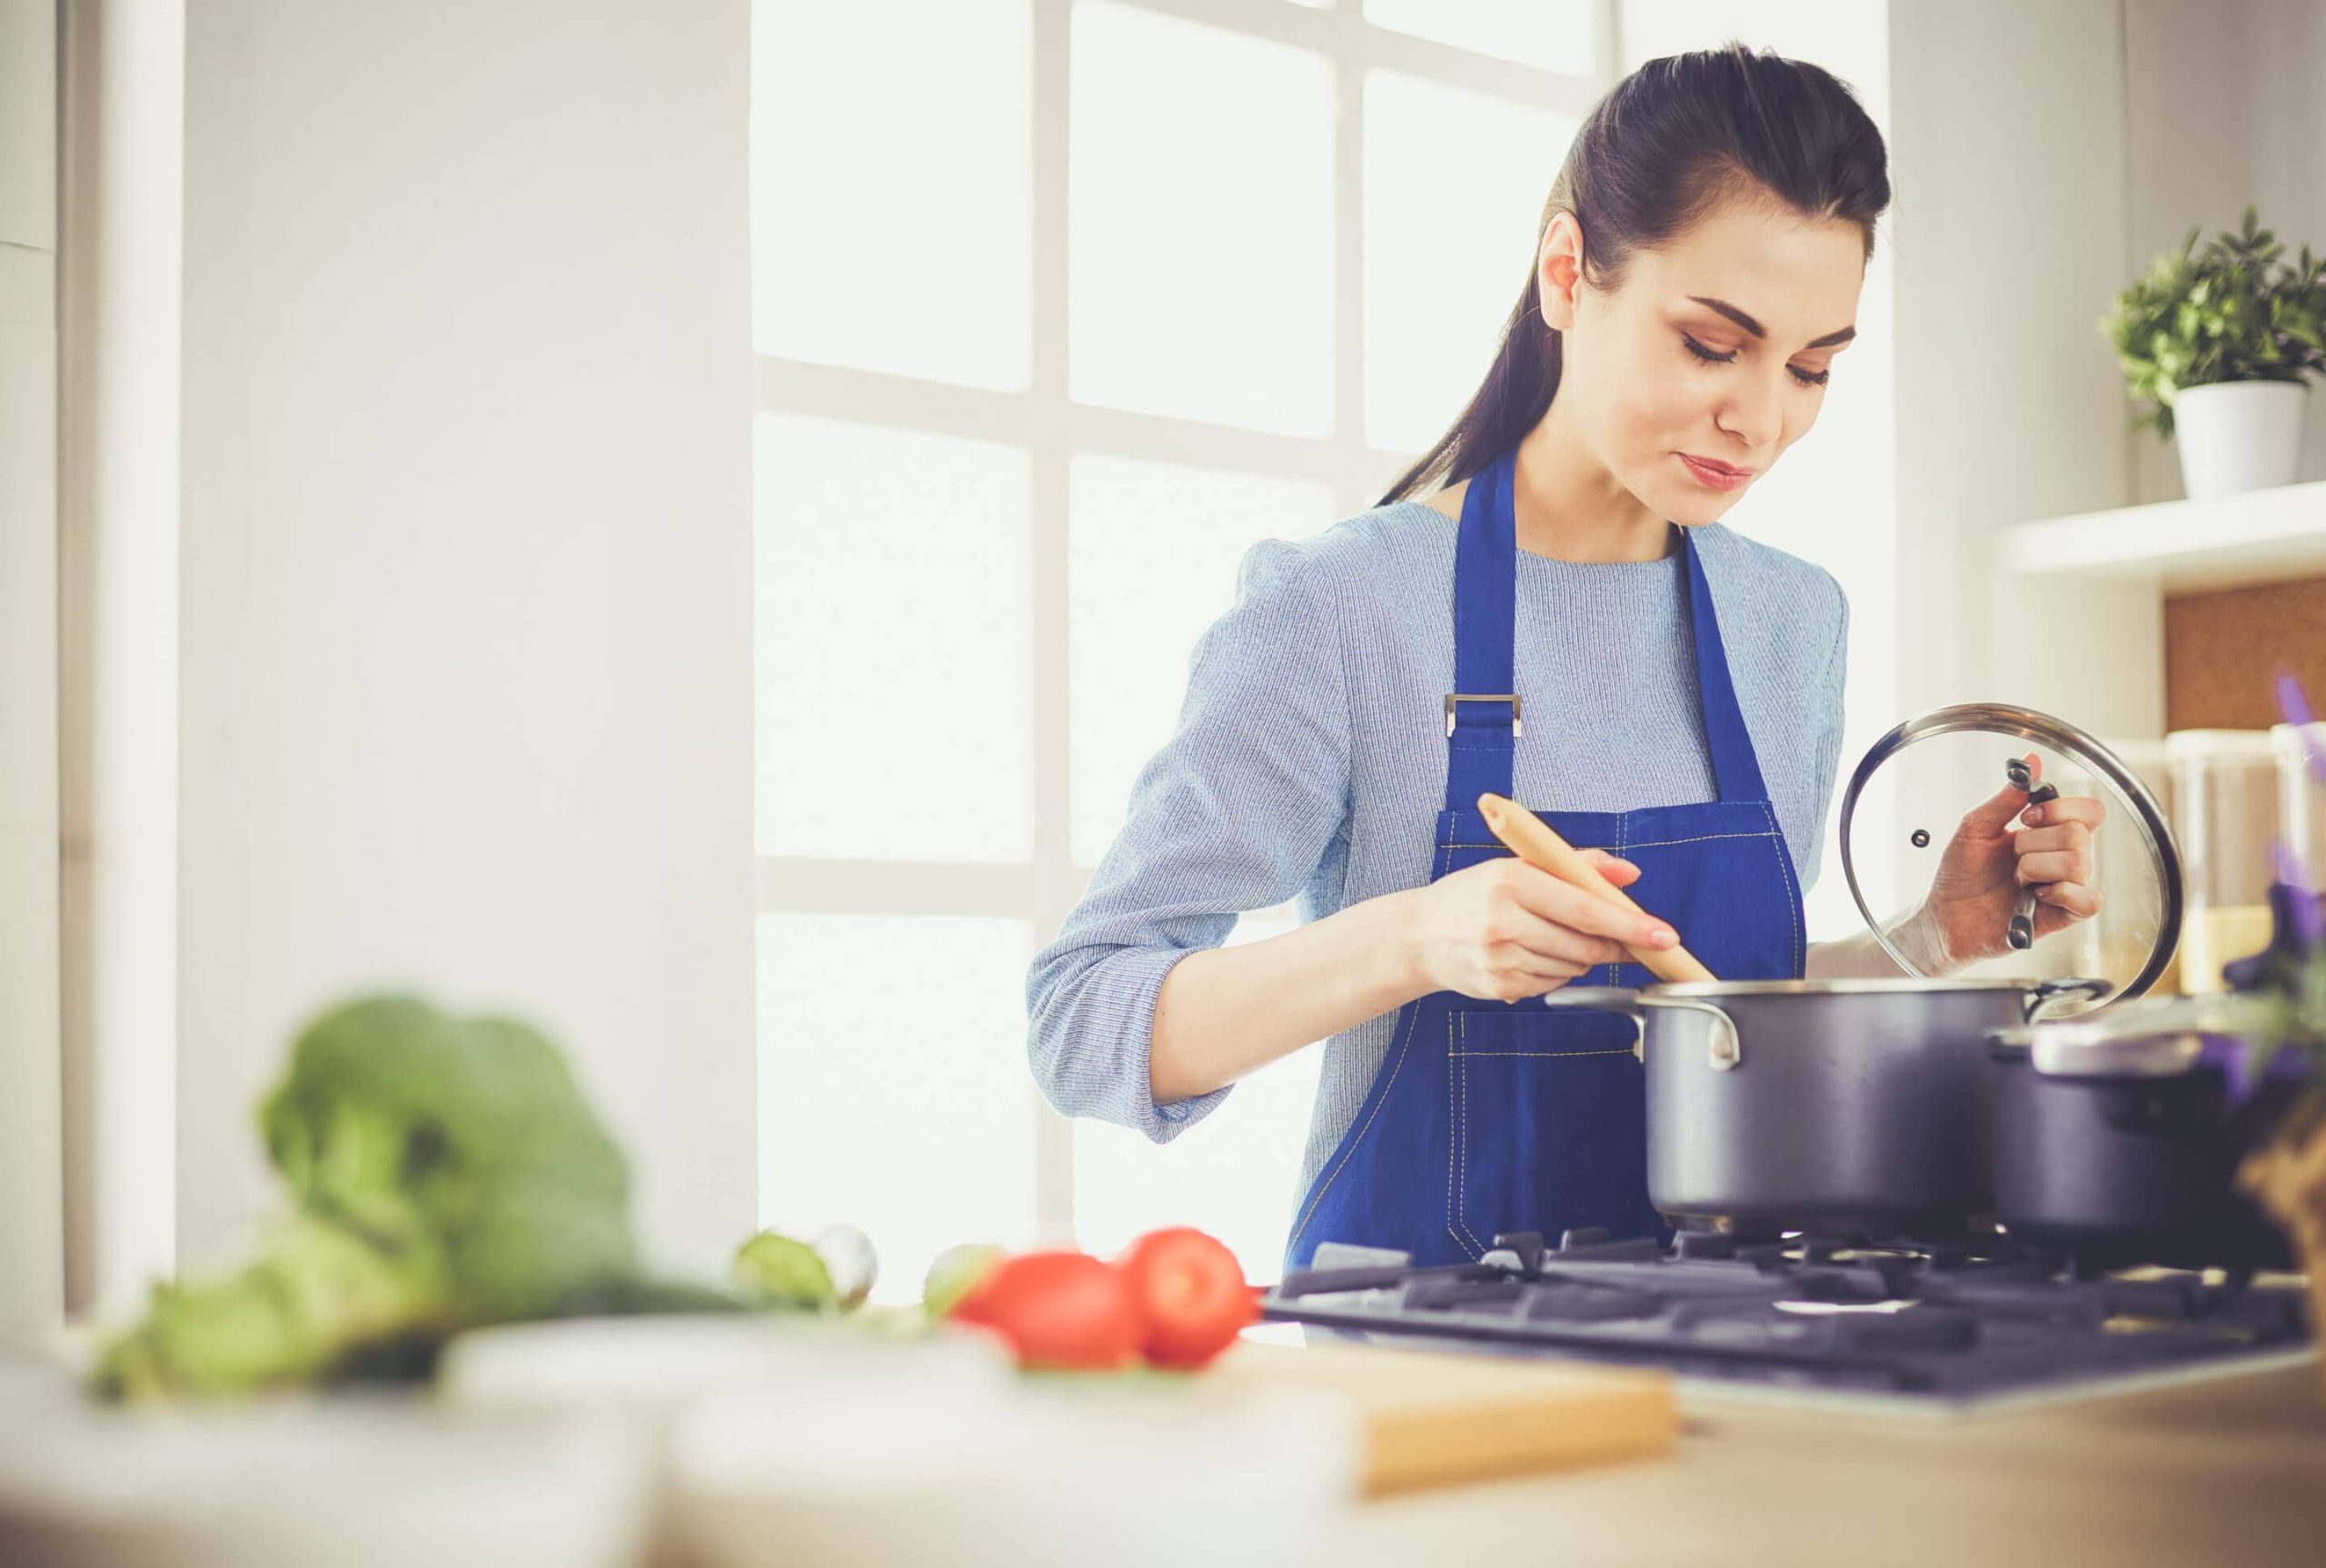 What Makes Cooking Faster